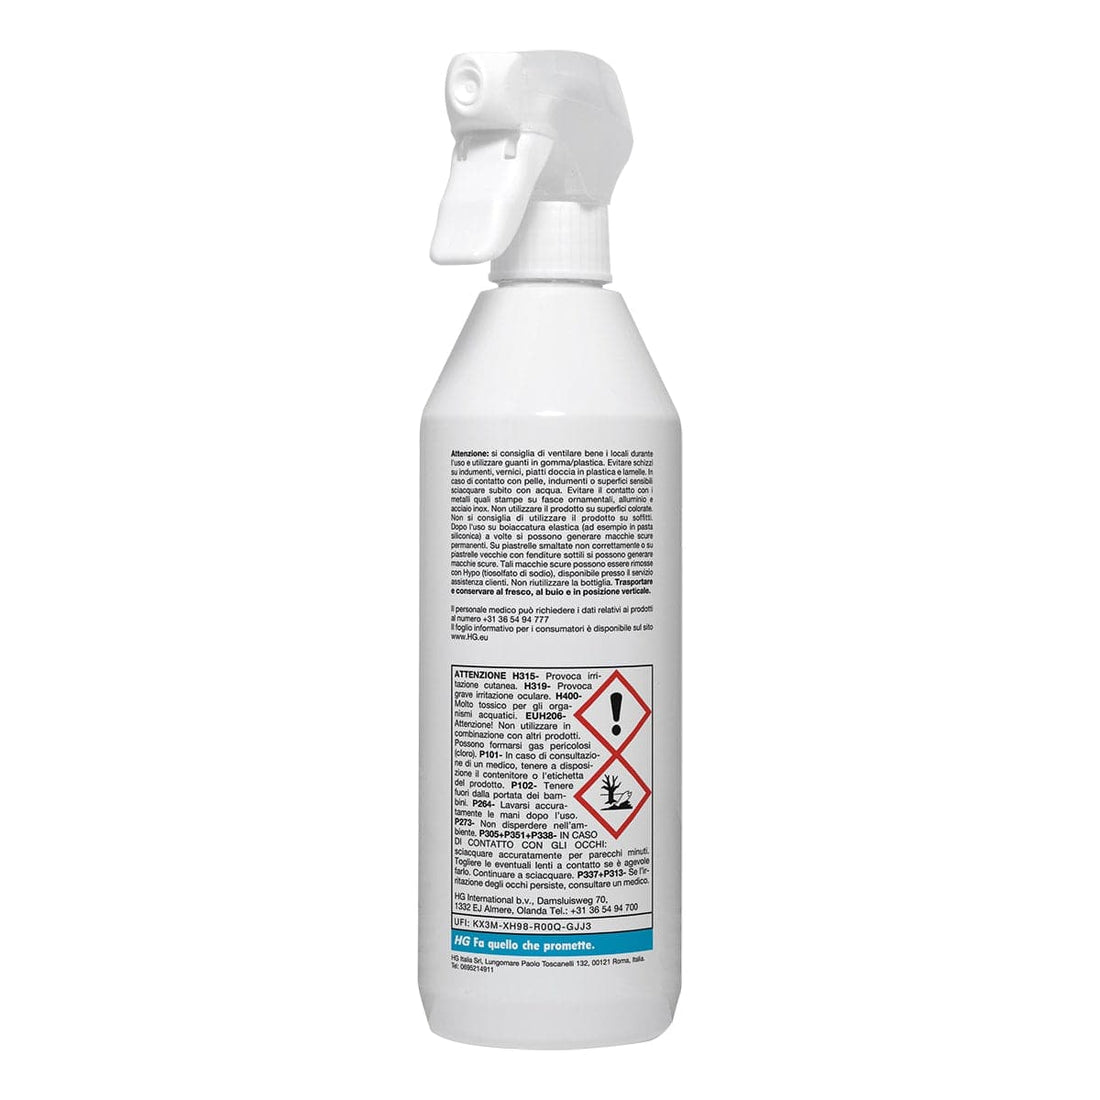 REMOVES MOULD, MOISTURE AND WEATHERING STAINS 500 ML - best price from Maltashopper.com BR470004144